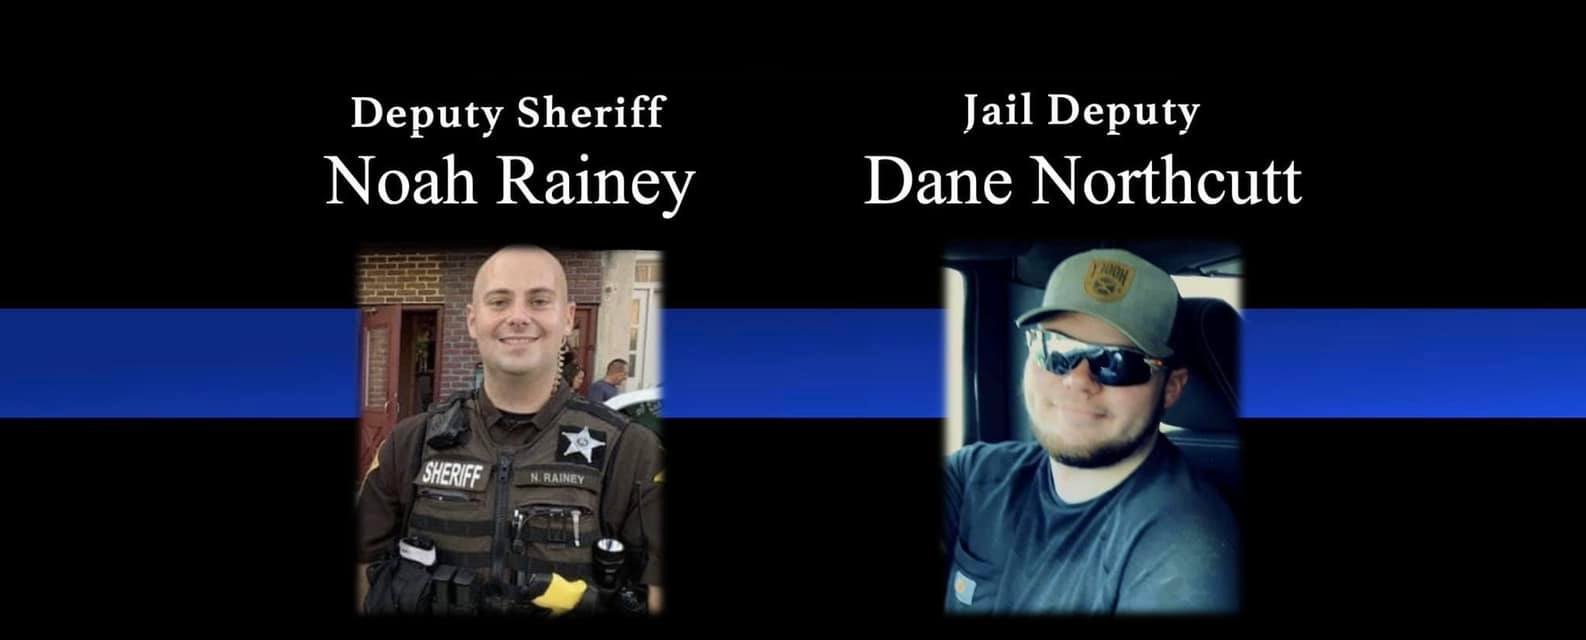 Thumbnail for the post titled: Funeral information for Carroll County Deputy Noah Rainey and Jail Deputy Dane Northcutt